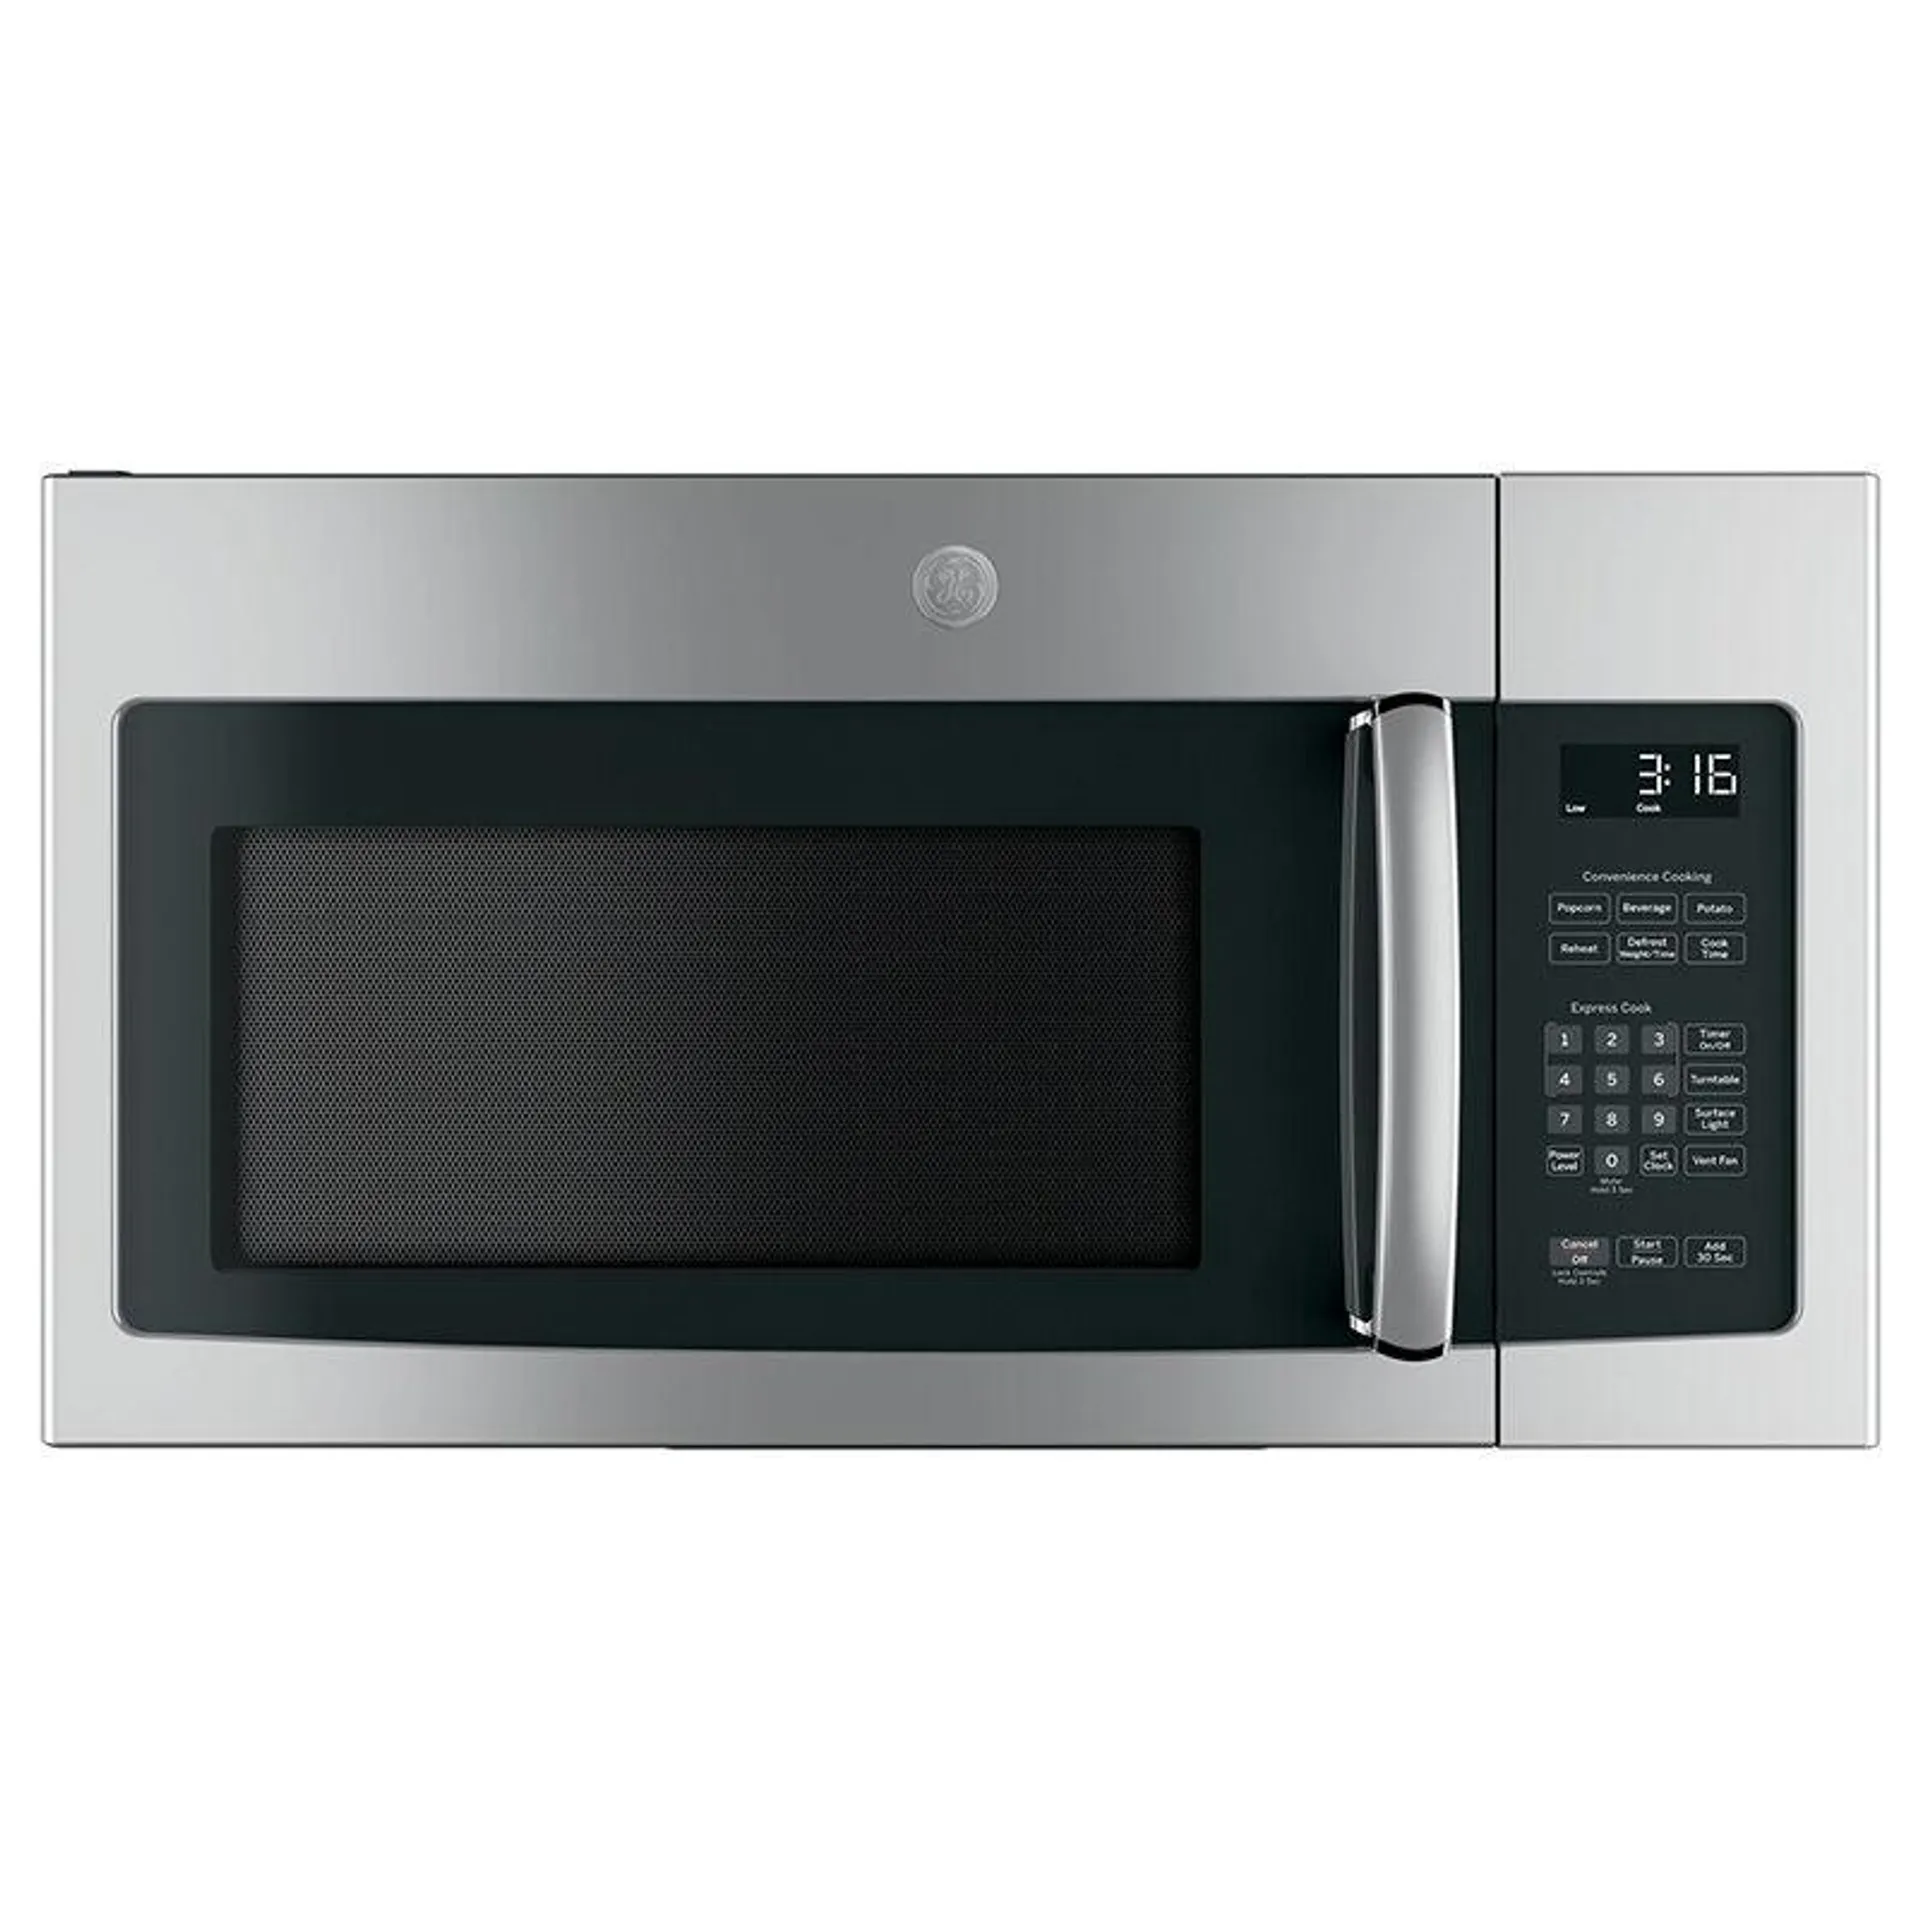 GE 30" 1.6 Cu. Ft. Over-the-Range Microwave with 10 Power Levels & 300 CFM - Stainless Steel